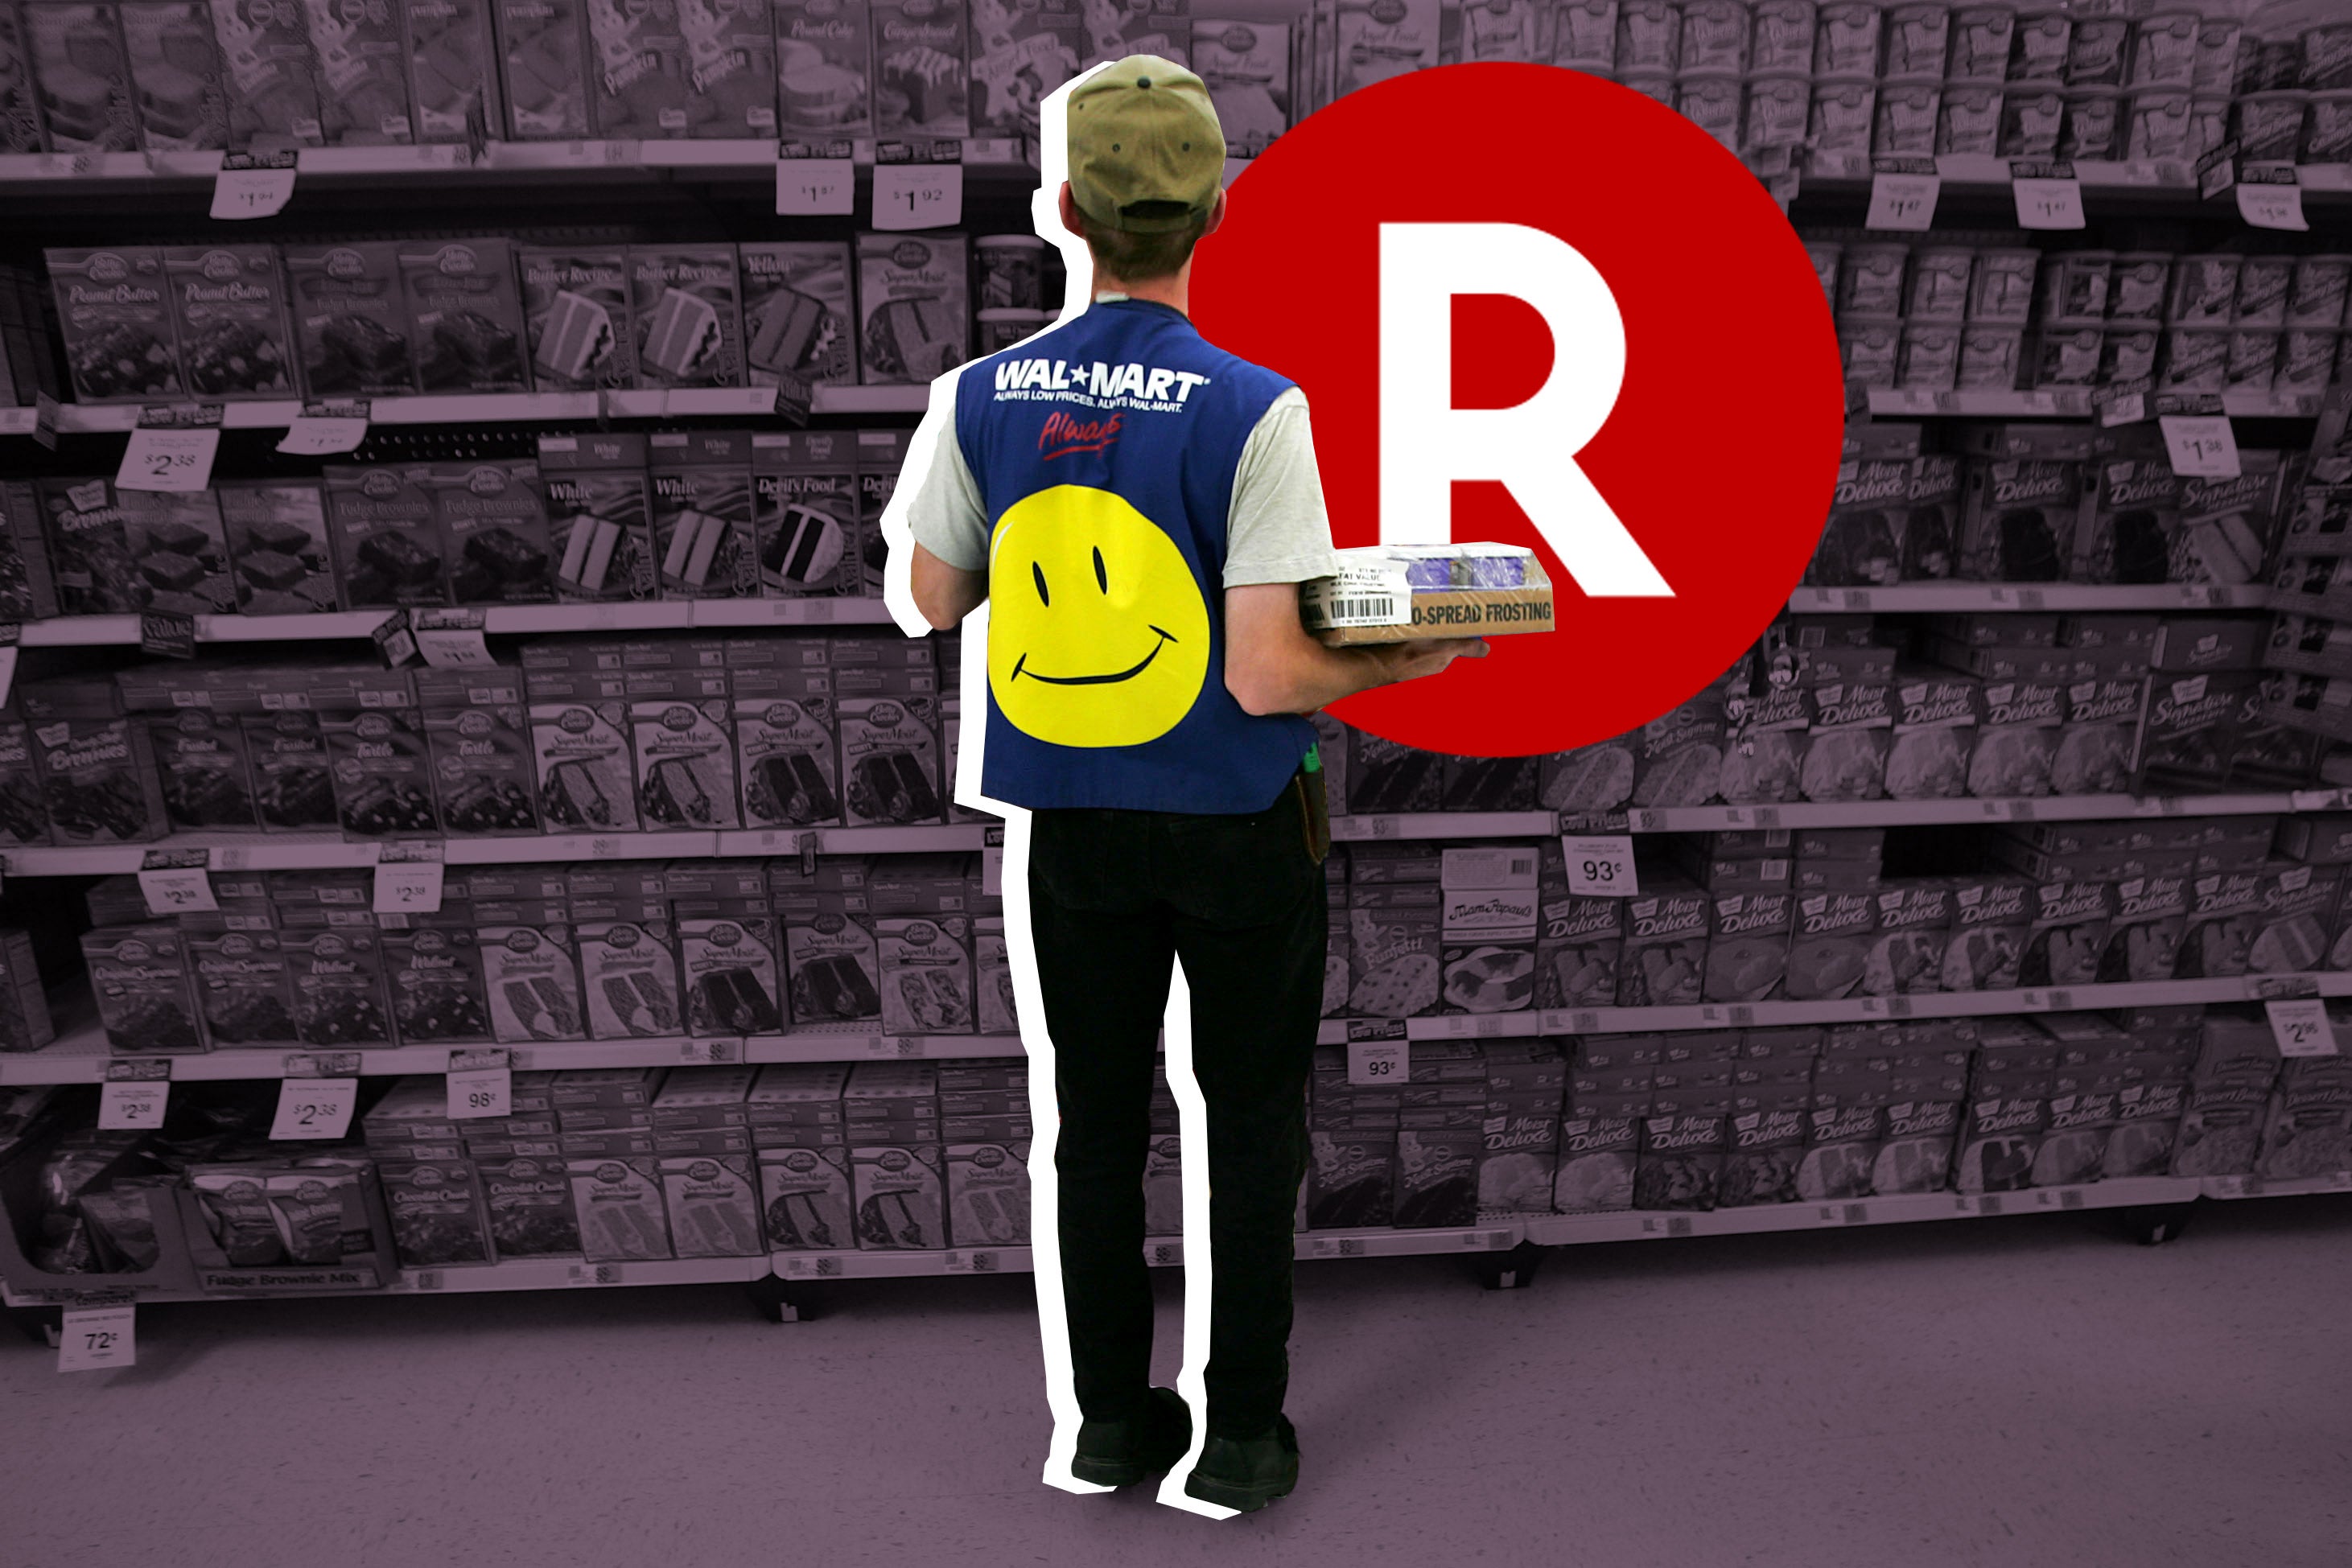 Walmart teaming with Rakuten is an attempt to chip away Amazon's business.